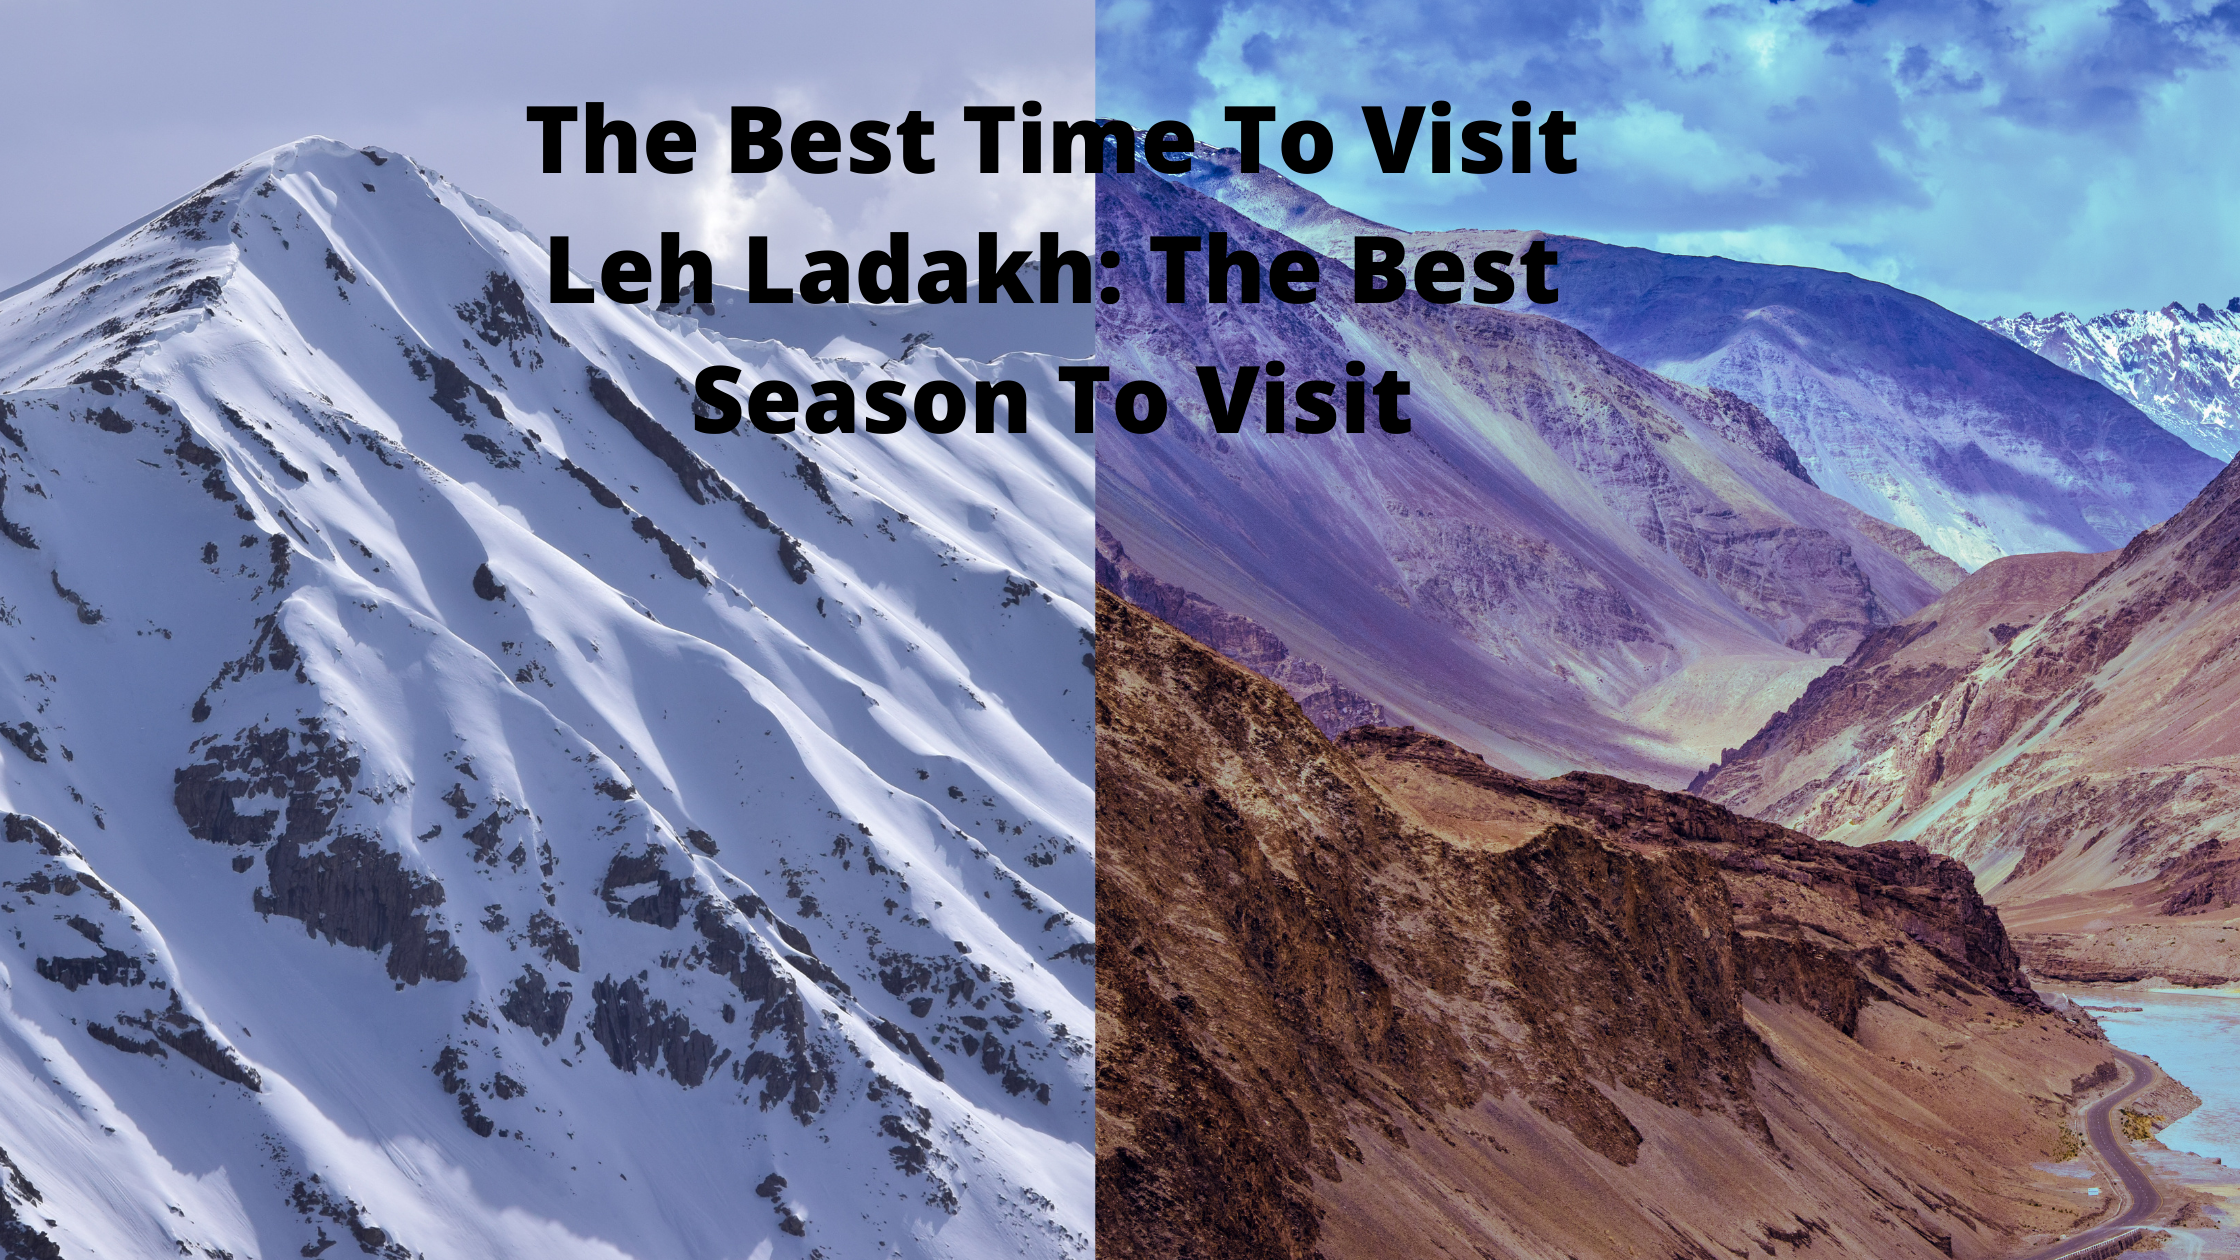 The Best Time To Visit Leh Ladakh: The Best Season To Visit